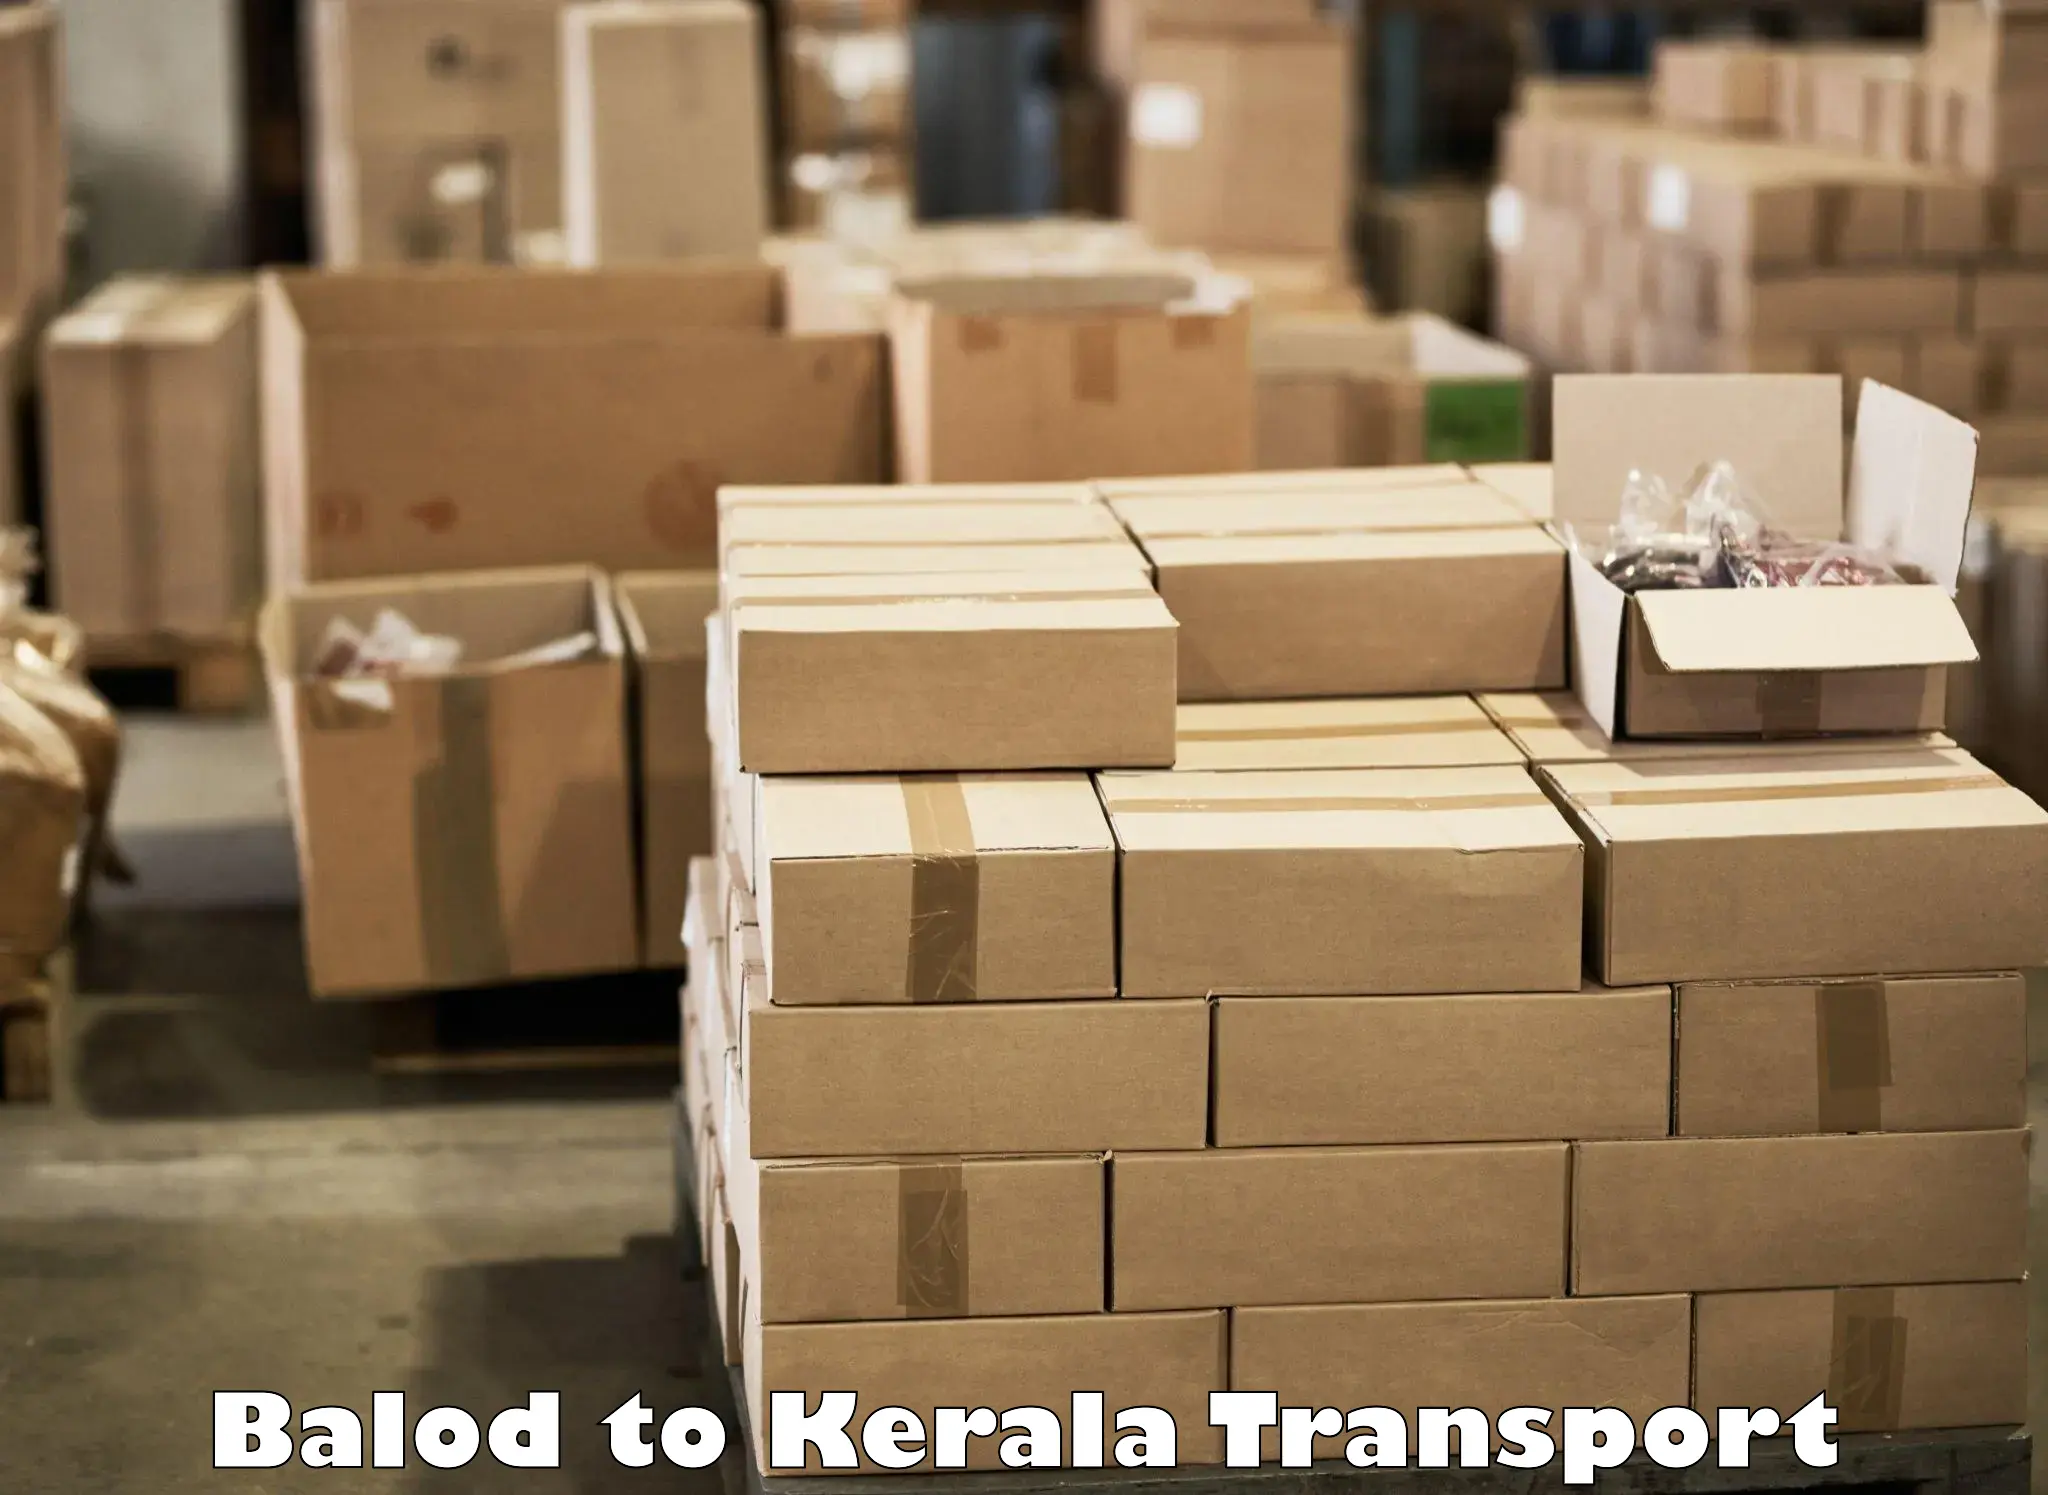 Daily parcel service transport in Balod to Kerala